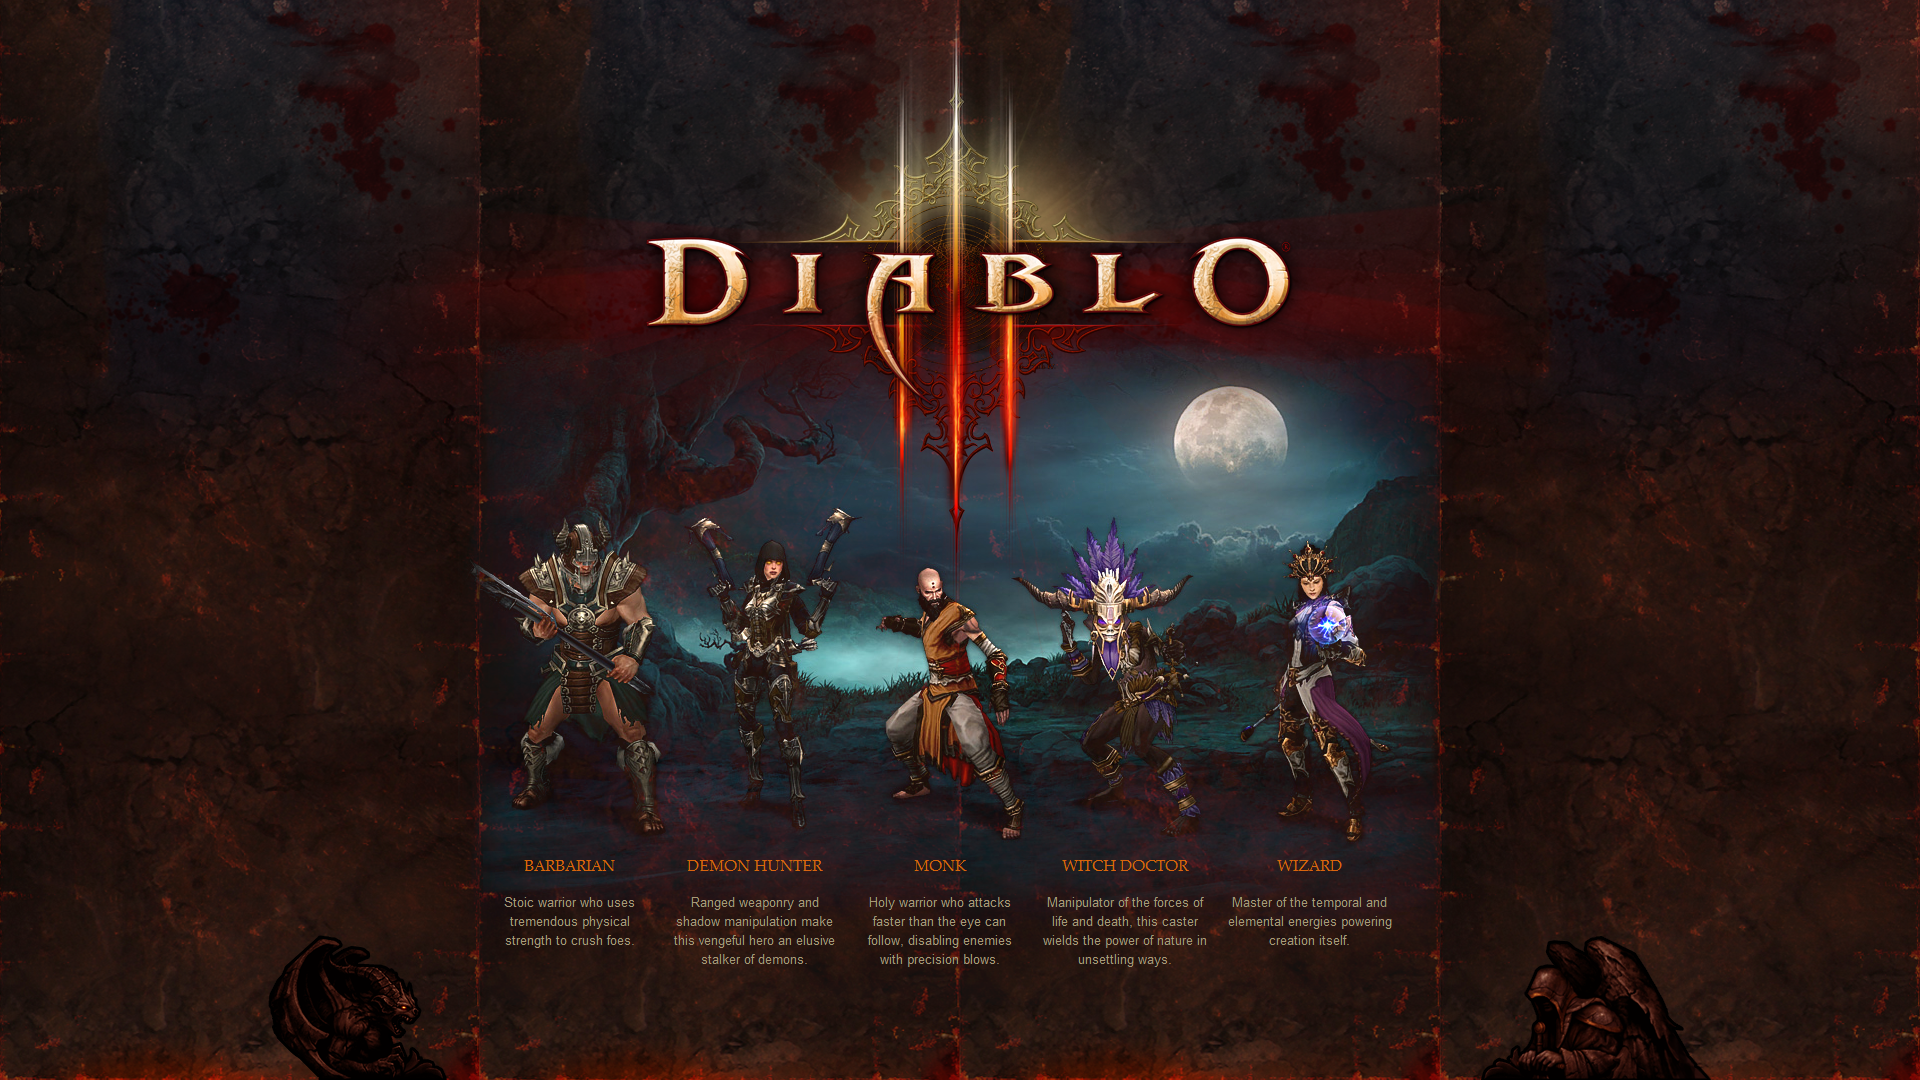 Diablo 3 Characters: Barbarian, Demon Hunter, Monk, Witch Doctor ...